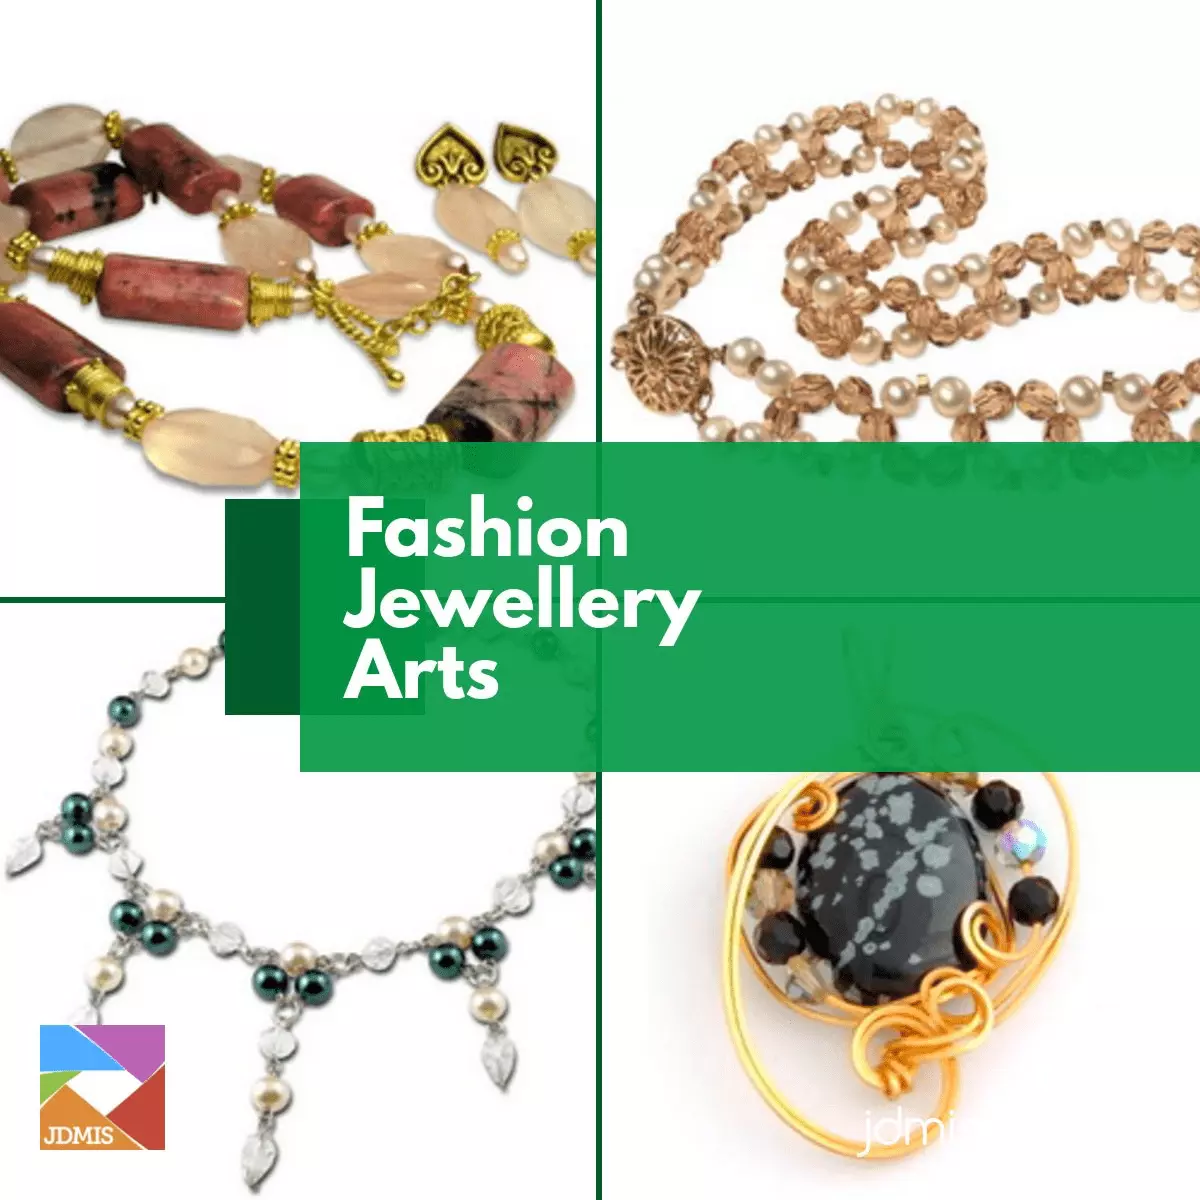 Get started in fashion jewellery design by assembling unique pieces with different hands-on techniques.